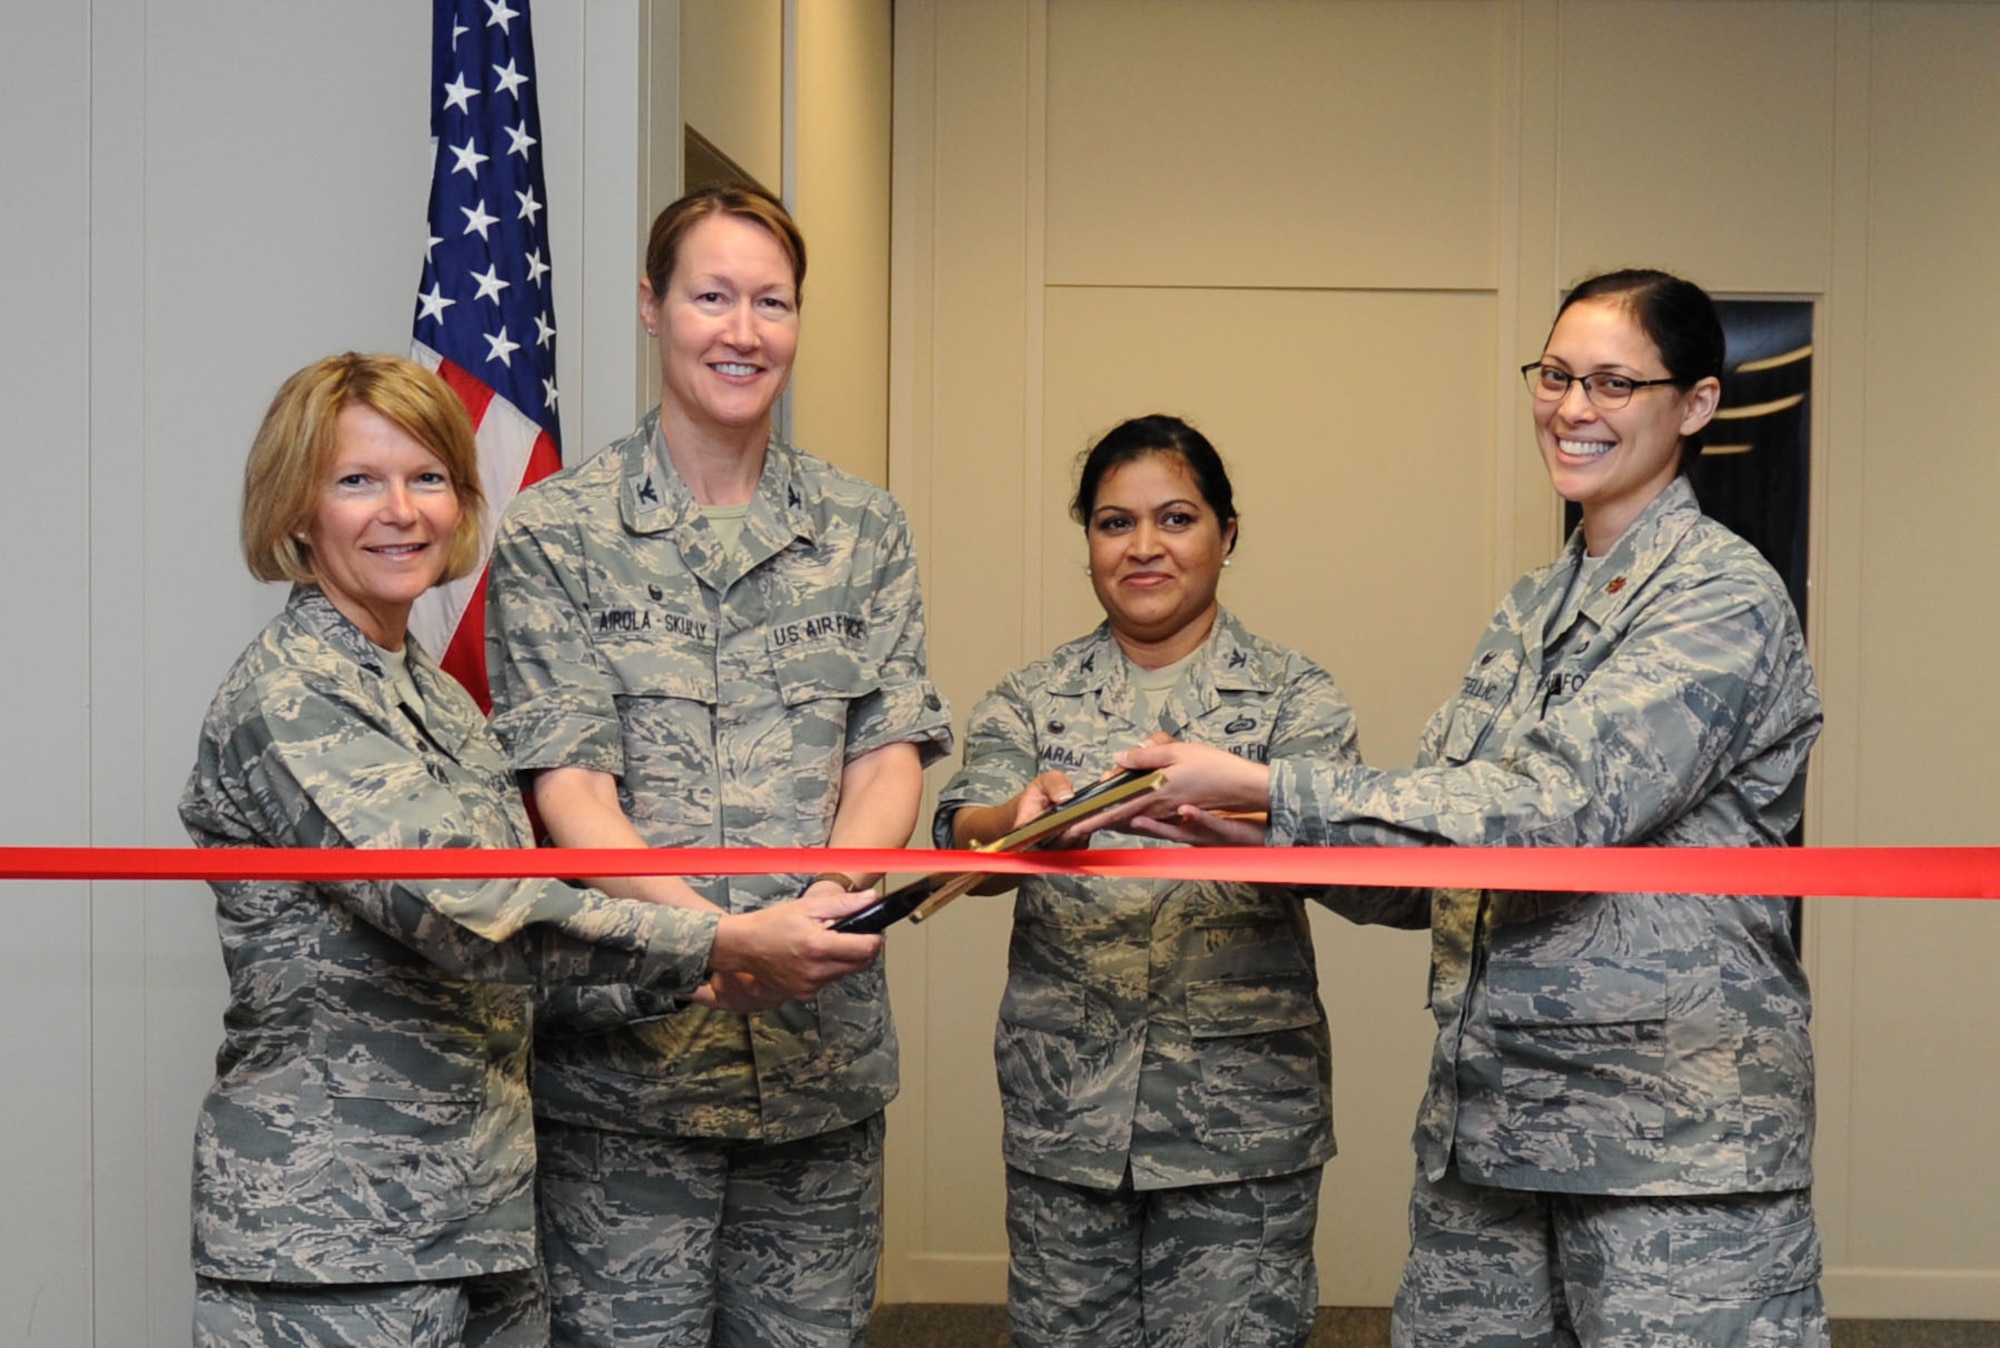 Lt. Col. Teresa King, 81st Force Support Squadron commander, Col. Susan Airola-Skully, 81st Mission Support Group commander, Col. Beena Maharaj, 403rd MSG commander and Maj. Lisa Kostellic, 403rd FSS commander, pose for a photo during an Integrated Personnel Management Initiative (IPM-I) ribbon cutting ceremony at the Sablich Center March 8, 2016, Keesler Air Force Base, Miss. The purpose of the 81st and 403rd Force Support Squadrons’ efforts at Keesler is to achieve a more capable and efficient organization to serve active duty and Reserve Airmen, their families and retirees who utilize FSS services. This effort was directed by the Secretary of the Air Force. (U.S. Air Force photo by Kemberly Groue)


Col. Susan Airola-Skully, 81st Mission Support Group commander, speaks to Keesler personnel during an Integrated Personnel Management Initiative (IPM-I) ribbon cutting ceremony at the Sablich Center, March 8, 2016, Keesler Air Force Base, Miss. The purpose of the 81stst and 403rd Force Support Squadrons’ integration efforts at Keesler is to achieve a more capable and efficient organization to serve active duty and Reserve Airmen, their families and retirees who utilize FSS services. This effort was directed by the Secretary of the Air Force. (U.S. Air Force photo by Kemberly Groue) 



2 of 3
DOWNLOAD HI-RES  /   PHOTO DETAILS 


Col. Susan Airola-Skully, 81st Mission Support Group commander, speaks to Keesler personnel during an Integrated Personnel Management Initiative (IPM-I) ribbon cutting ceremony at the Sablich Center, March 8, 2016, Keesler Air Force Base, Miss. The purpose of the 81stst and 403rd Force Support Squadrons’ integration efforts at Keesler is to achieve a more capable and efficient organization to serve active duty and Reserve Airmen, their families and retirees who utilize FSS services. This effort was directed by the Secretary of the Air Force. (U.S. Air Force photo by Kemberly Groue)


James Taylor, 81st Force Support Squadron